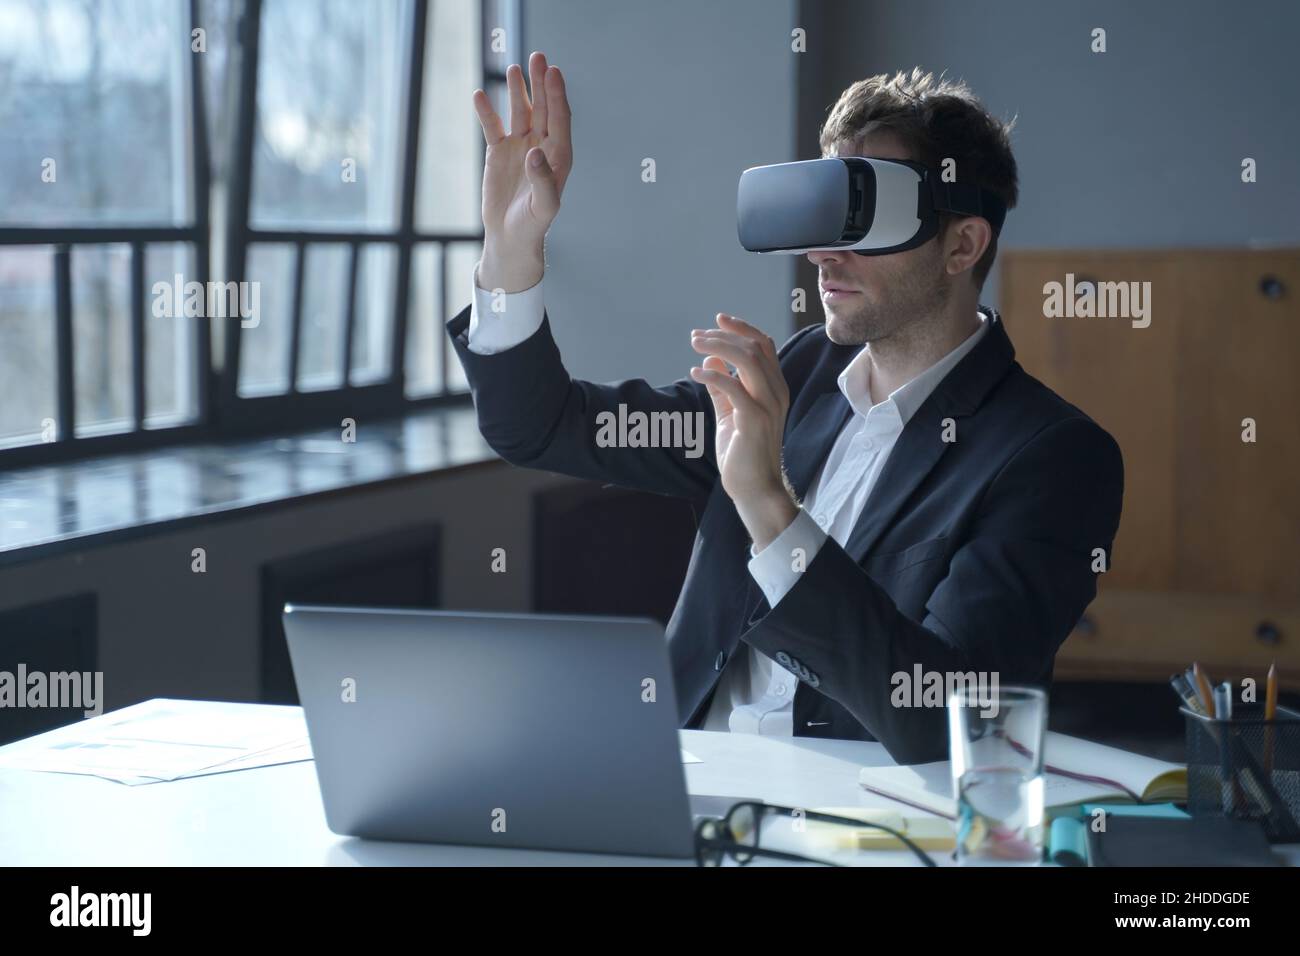 Male office worker in vr headset interacting with digital interface while sitting at desk Stock Photo